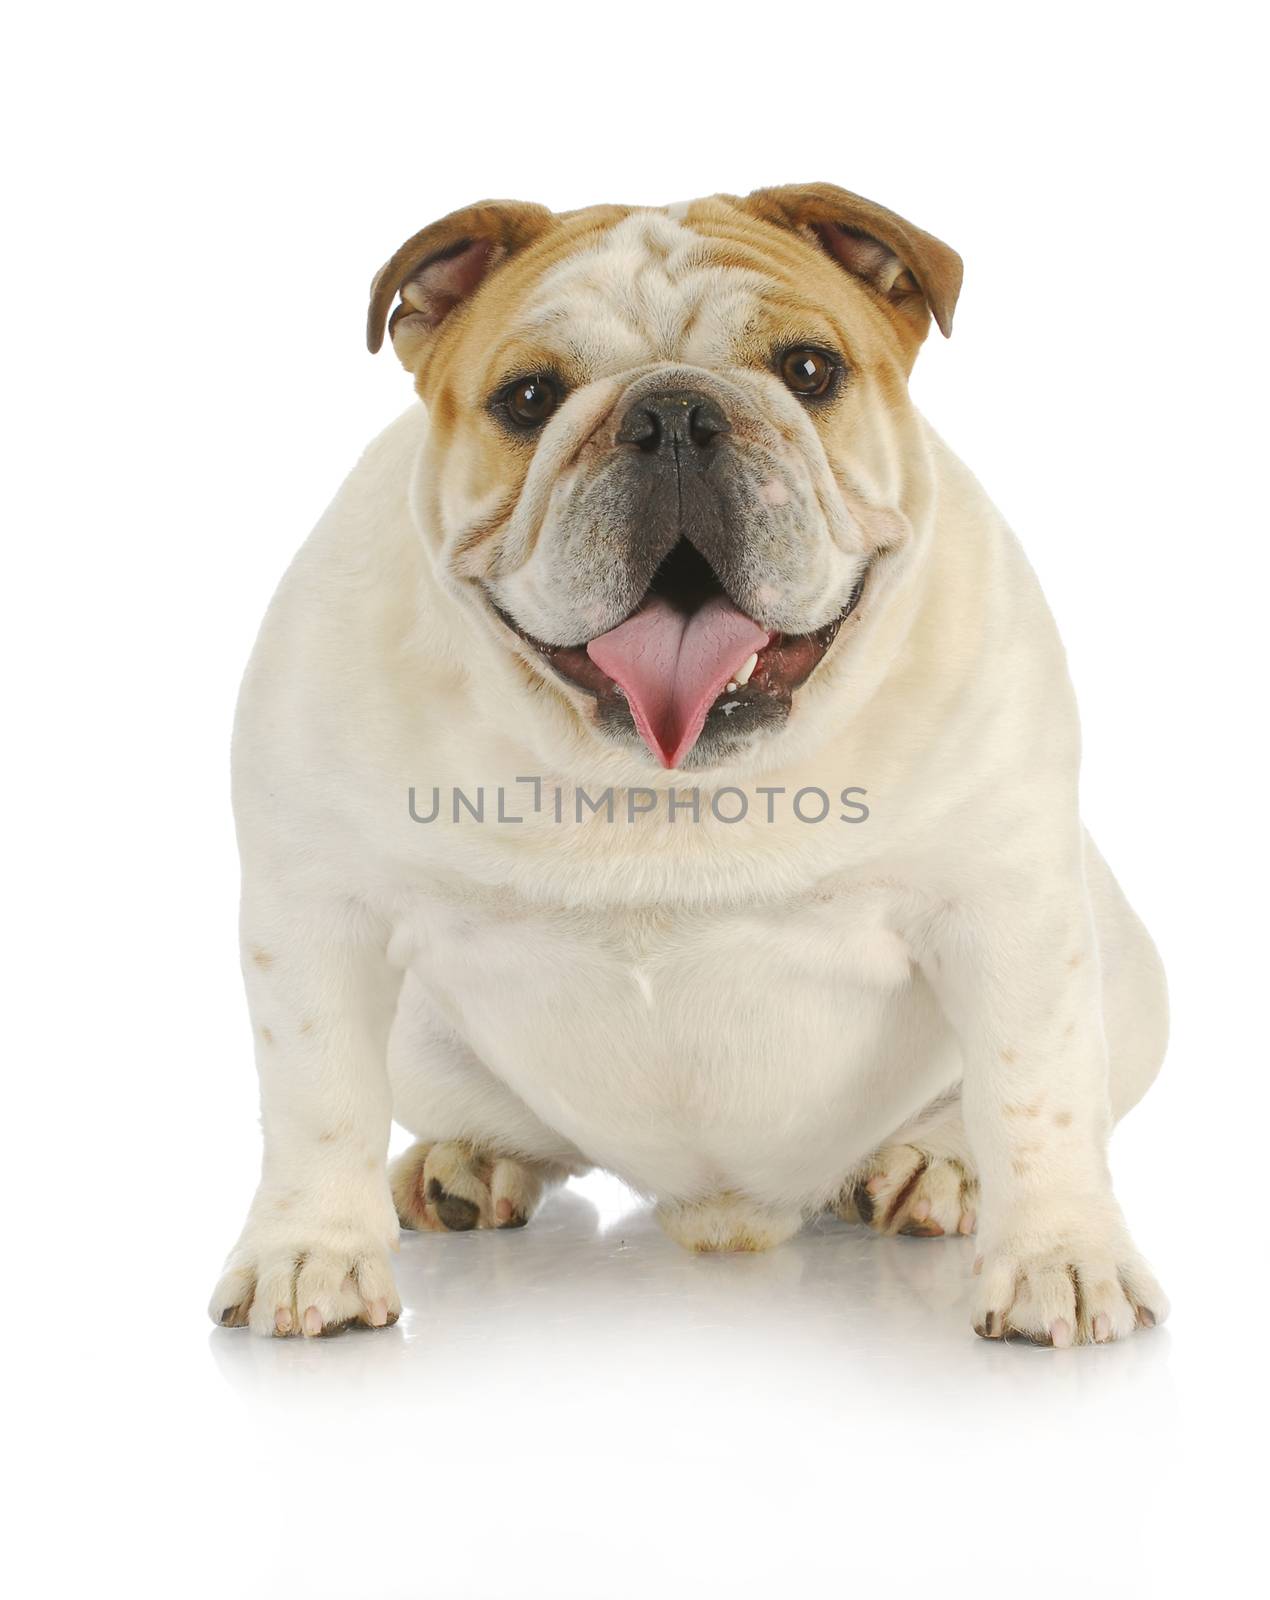 english bulldog sitting with tongue out panting looking at viewer - one year old